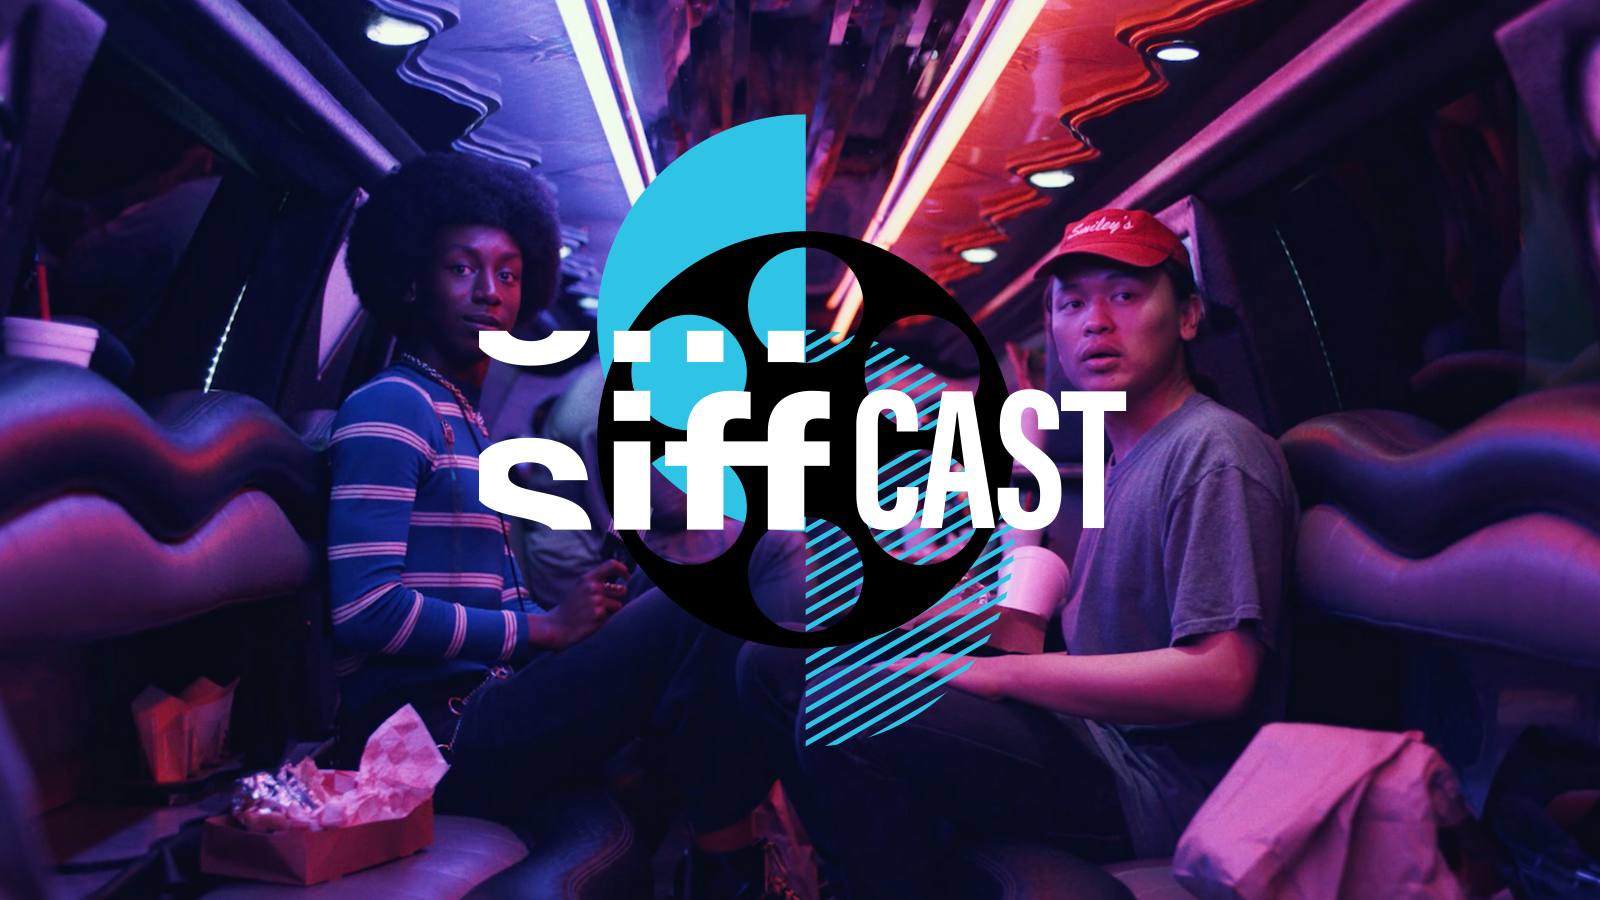 SIFFcast: SIFF 2021 Summertime Q&A